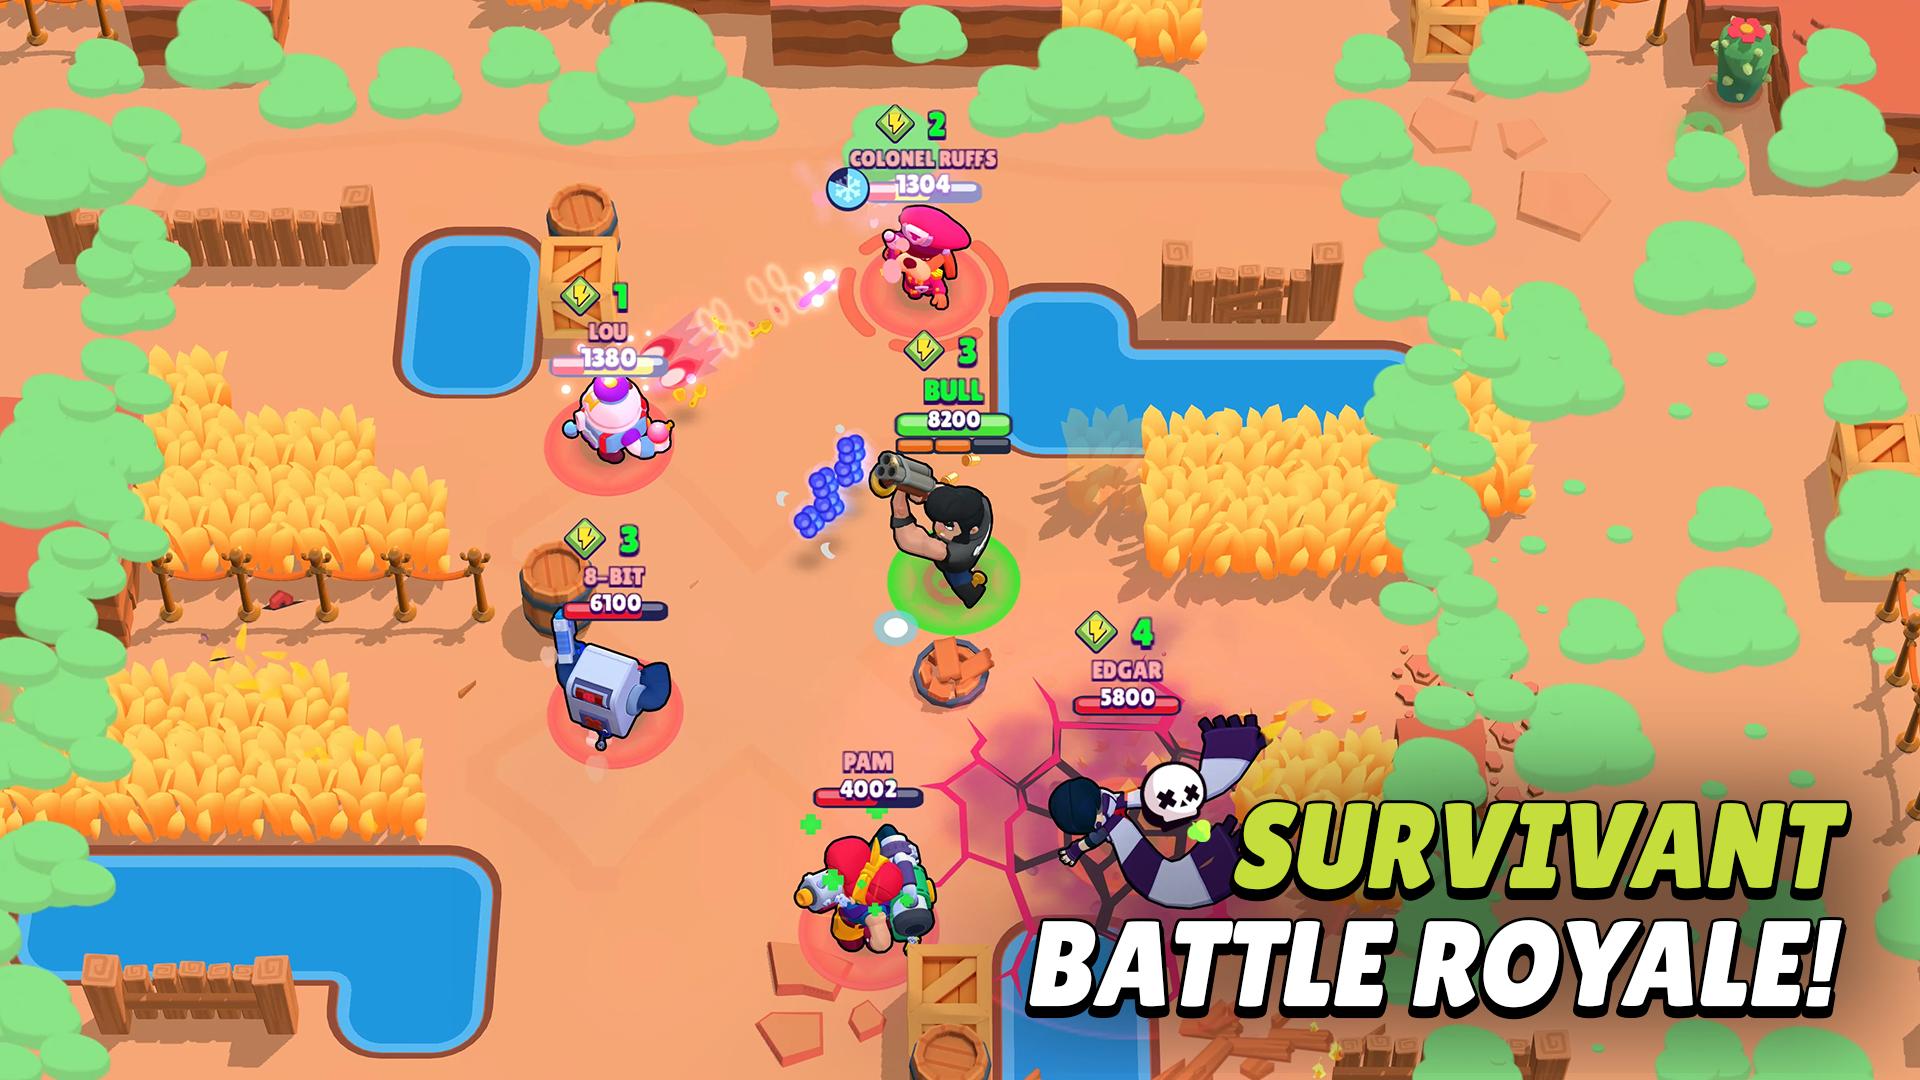 Brawl Stars Apk Download Pick Up Your Hero Characters In 3v3 Smash And Grab Mode Brock Shelly Jessie And Barley - vidéo brawl stars comment avoir léo